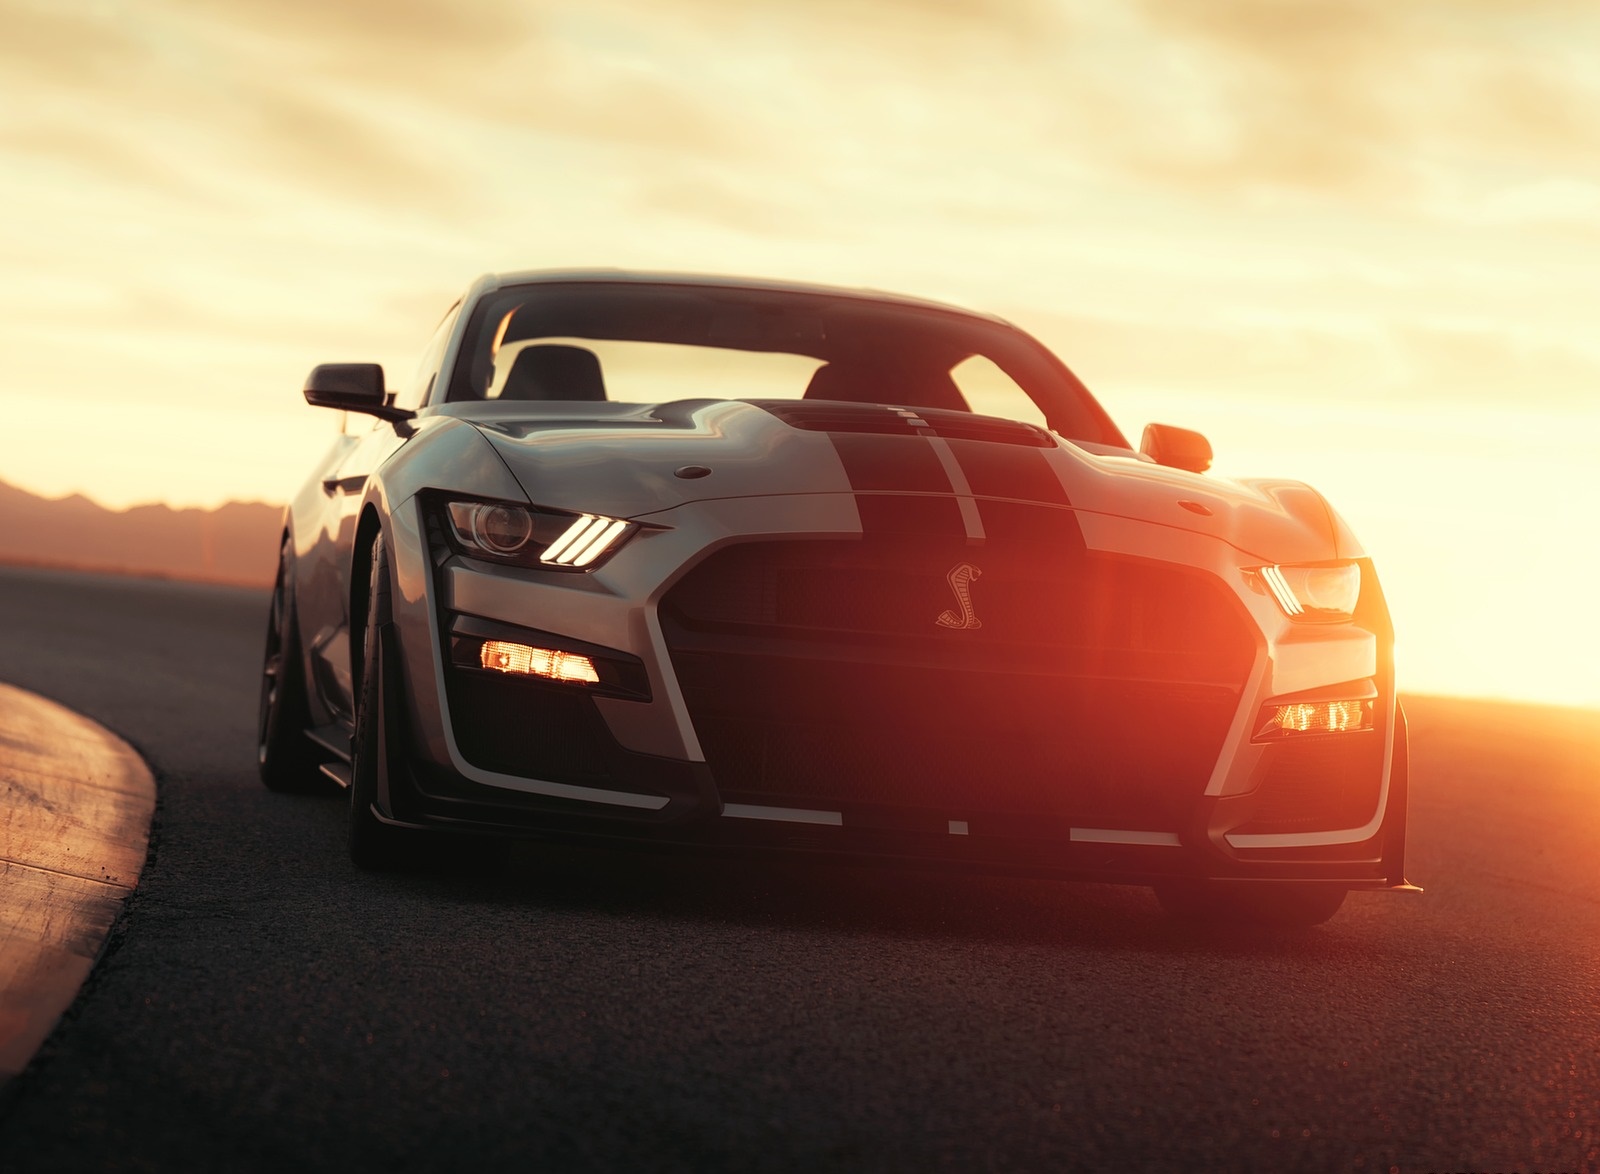 2020 Ford Mustang Shelby Gt500 Front Wallpapers - 2020 Ford Mustang Shelby Gt500 Venom - HD Wallpaper 